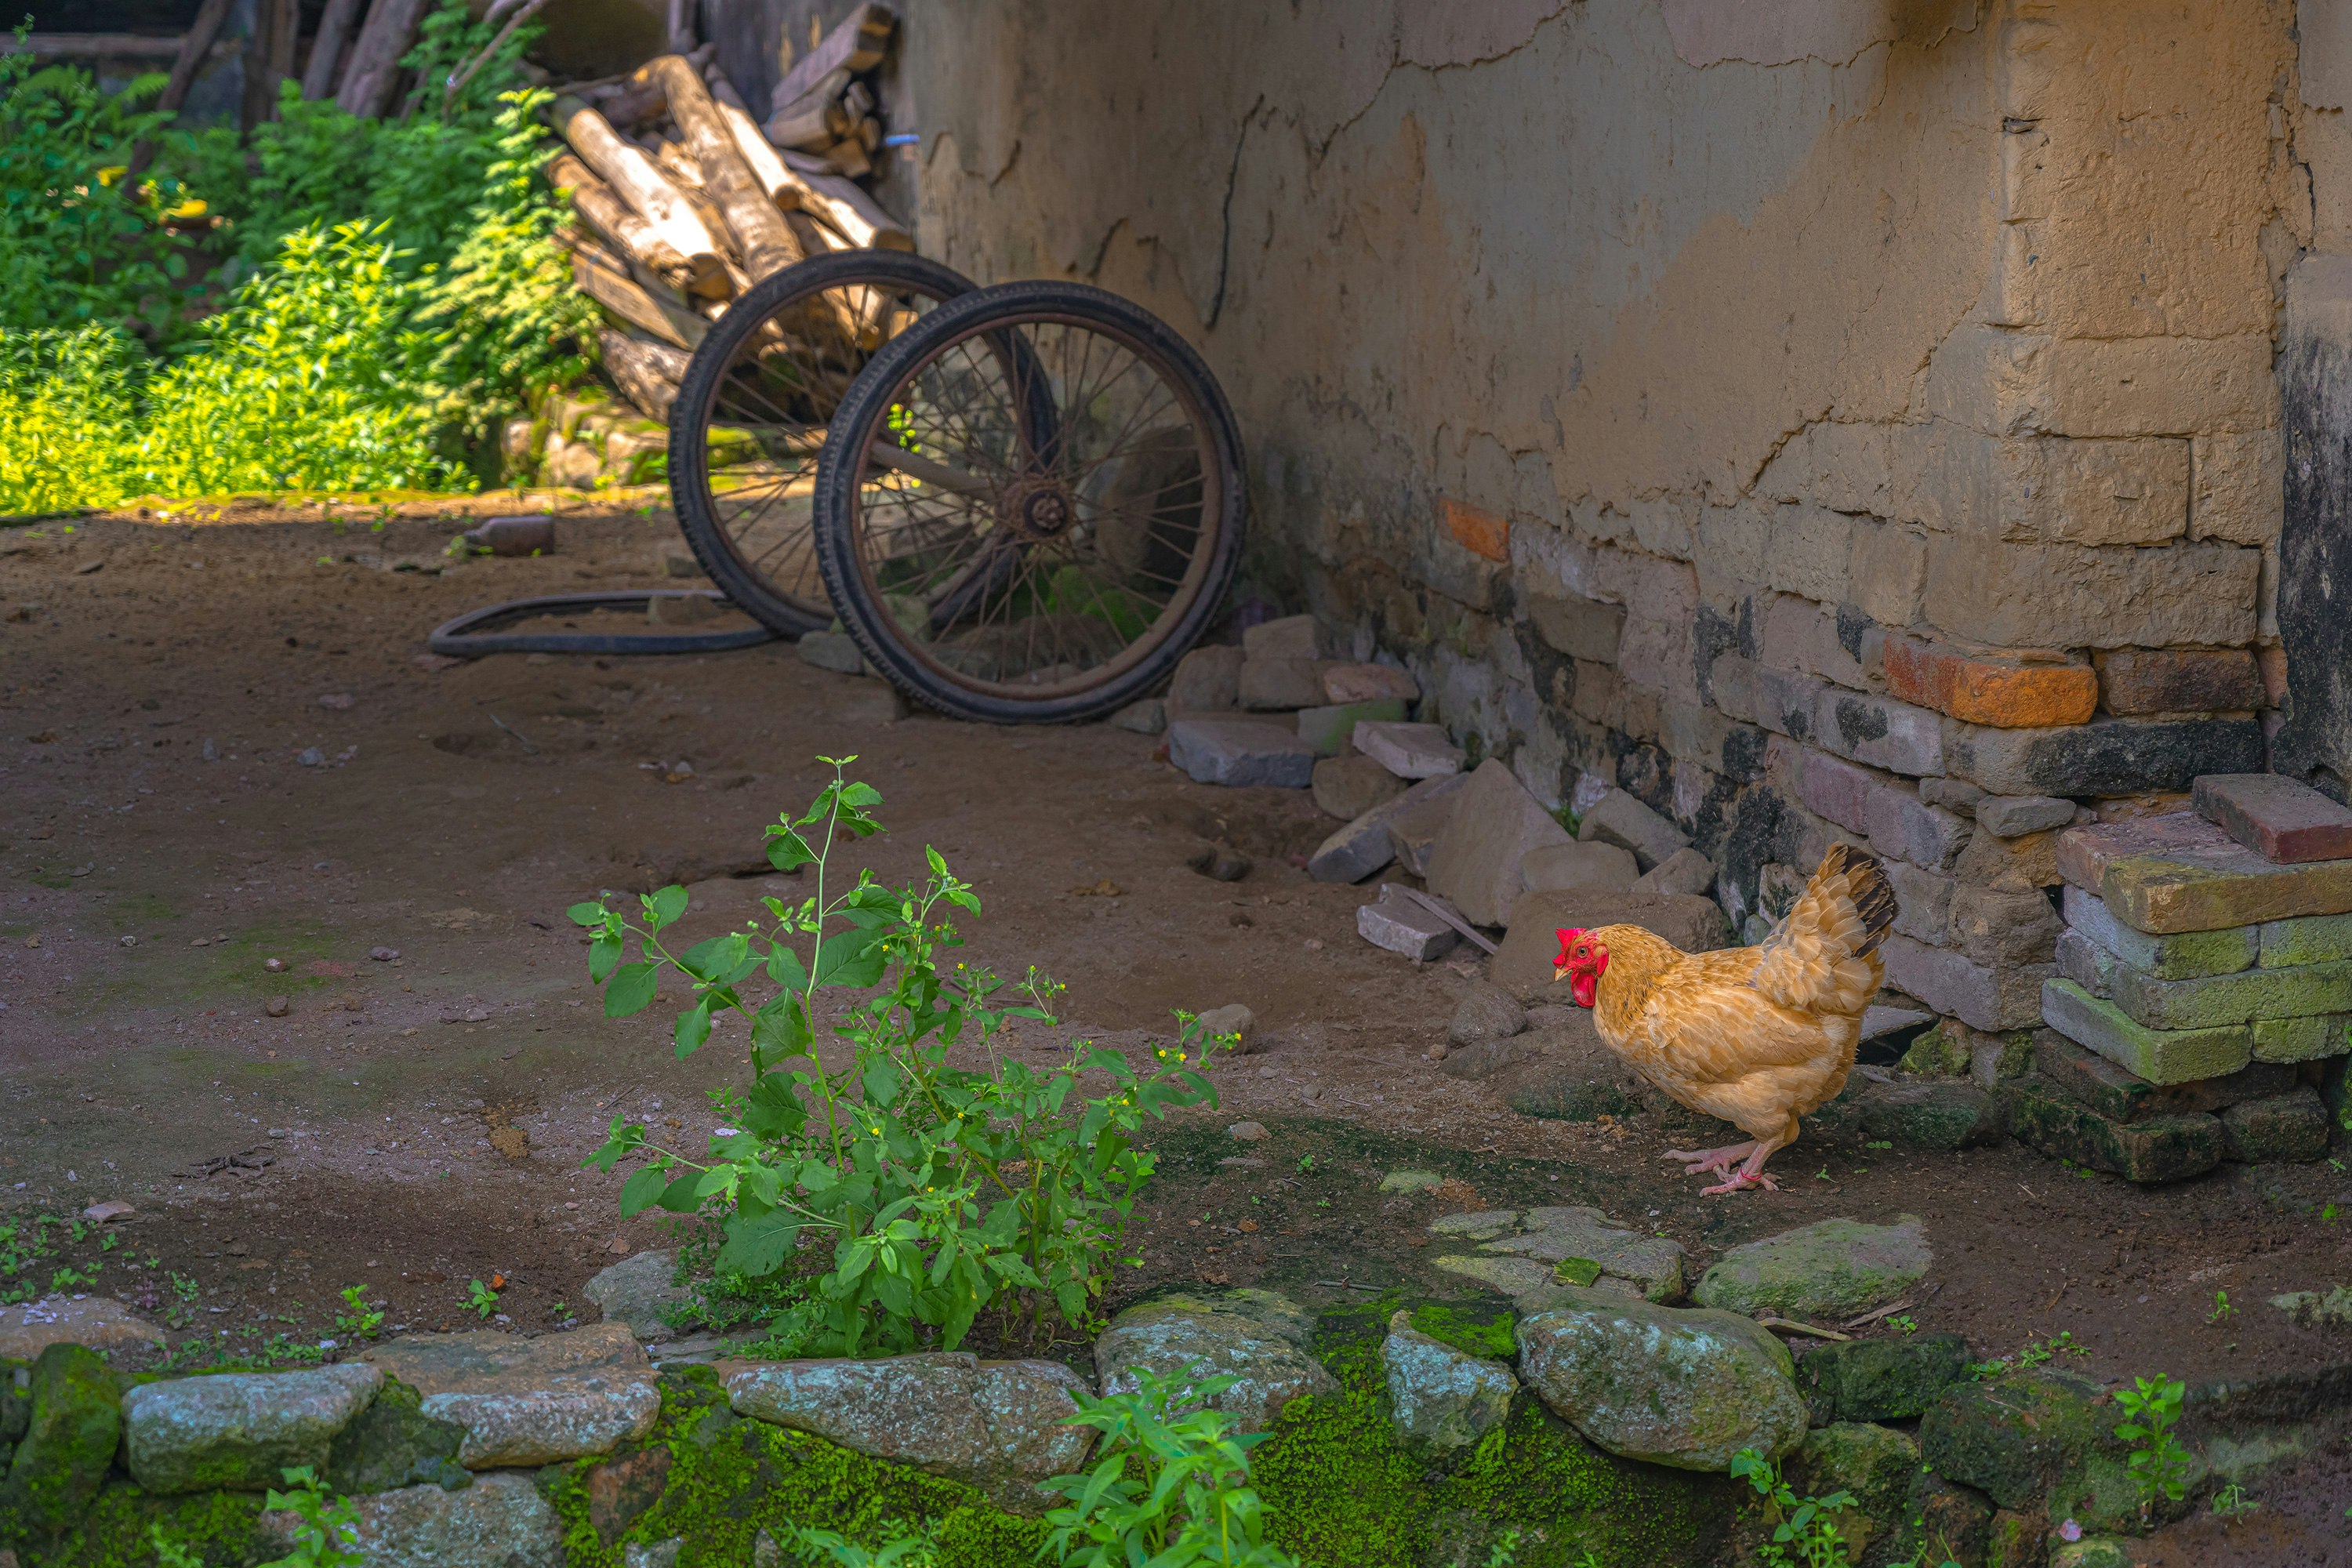 brown chicken on green grass near brown wooden bicycle